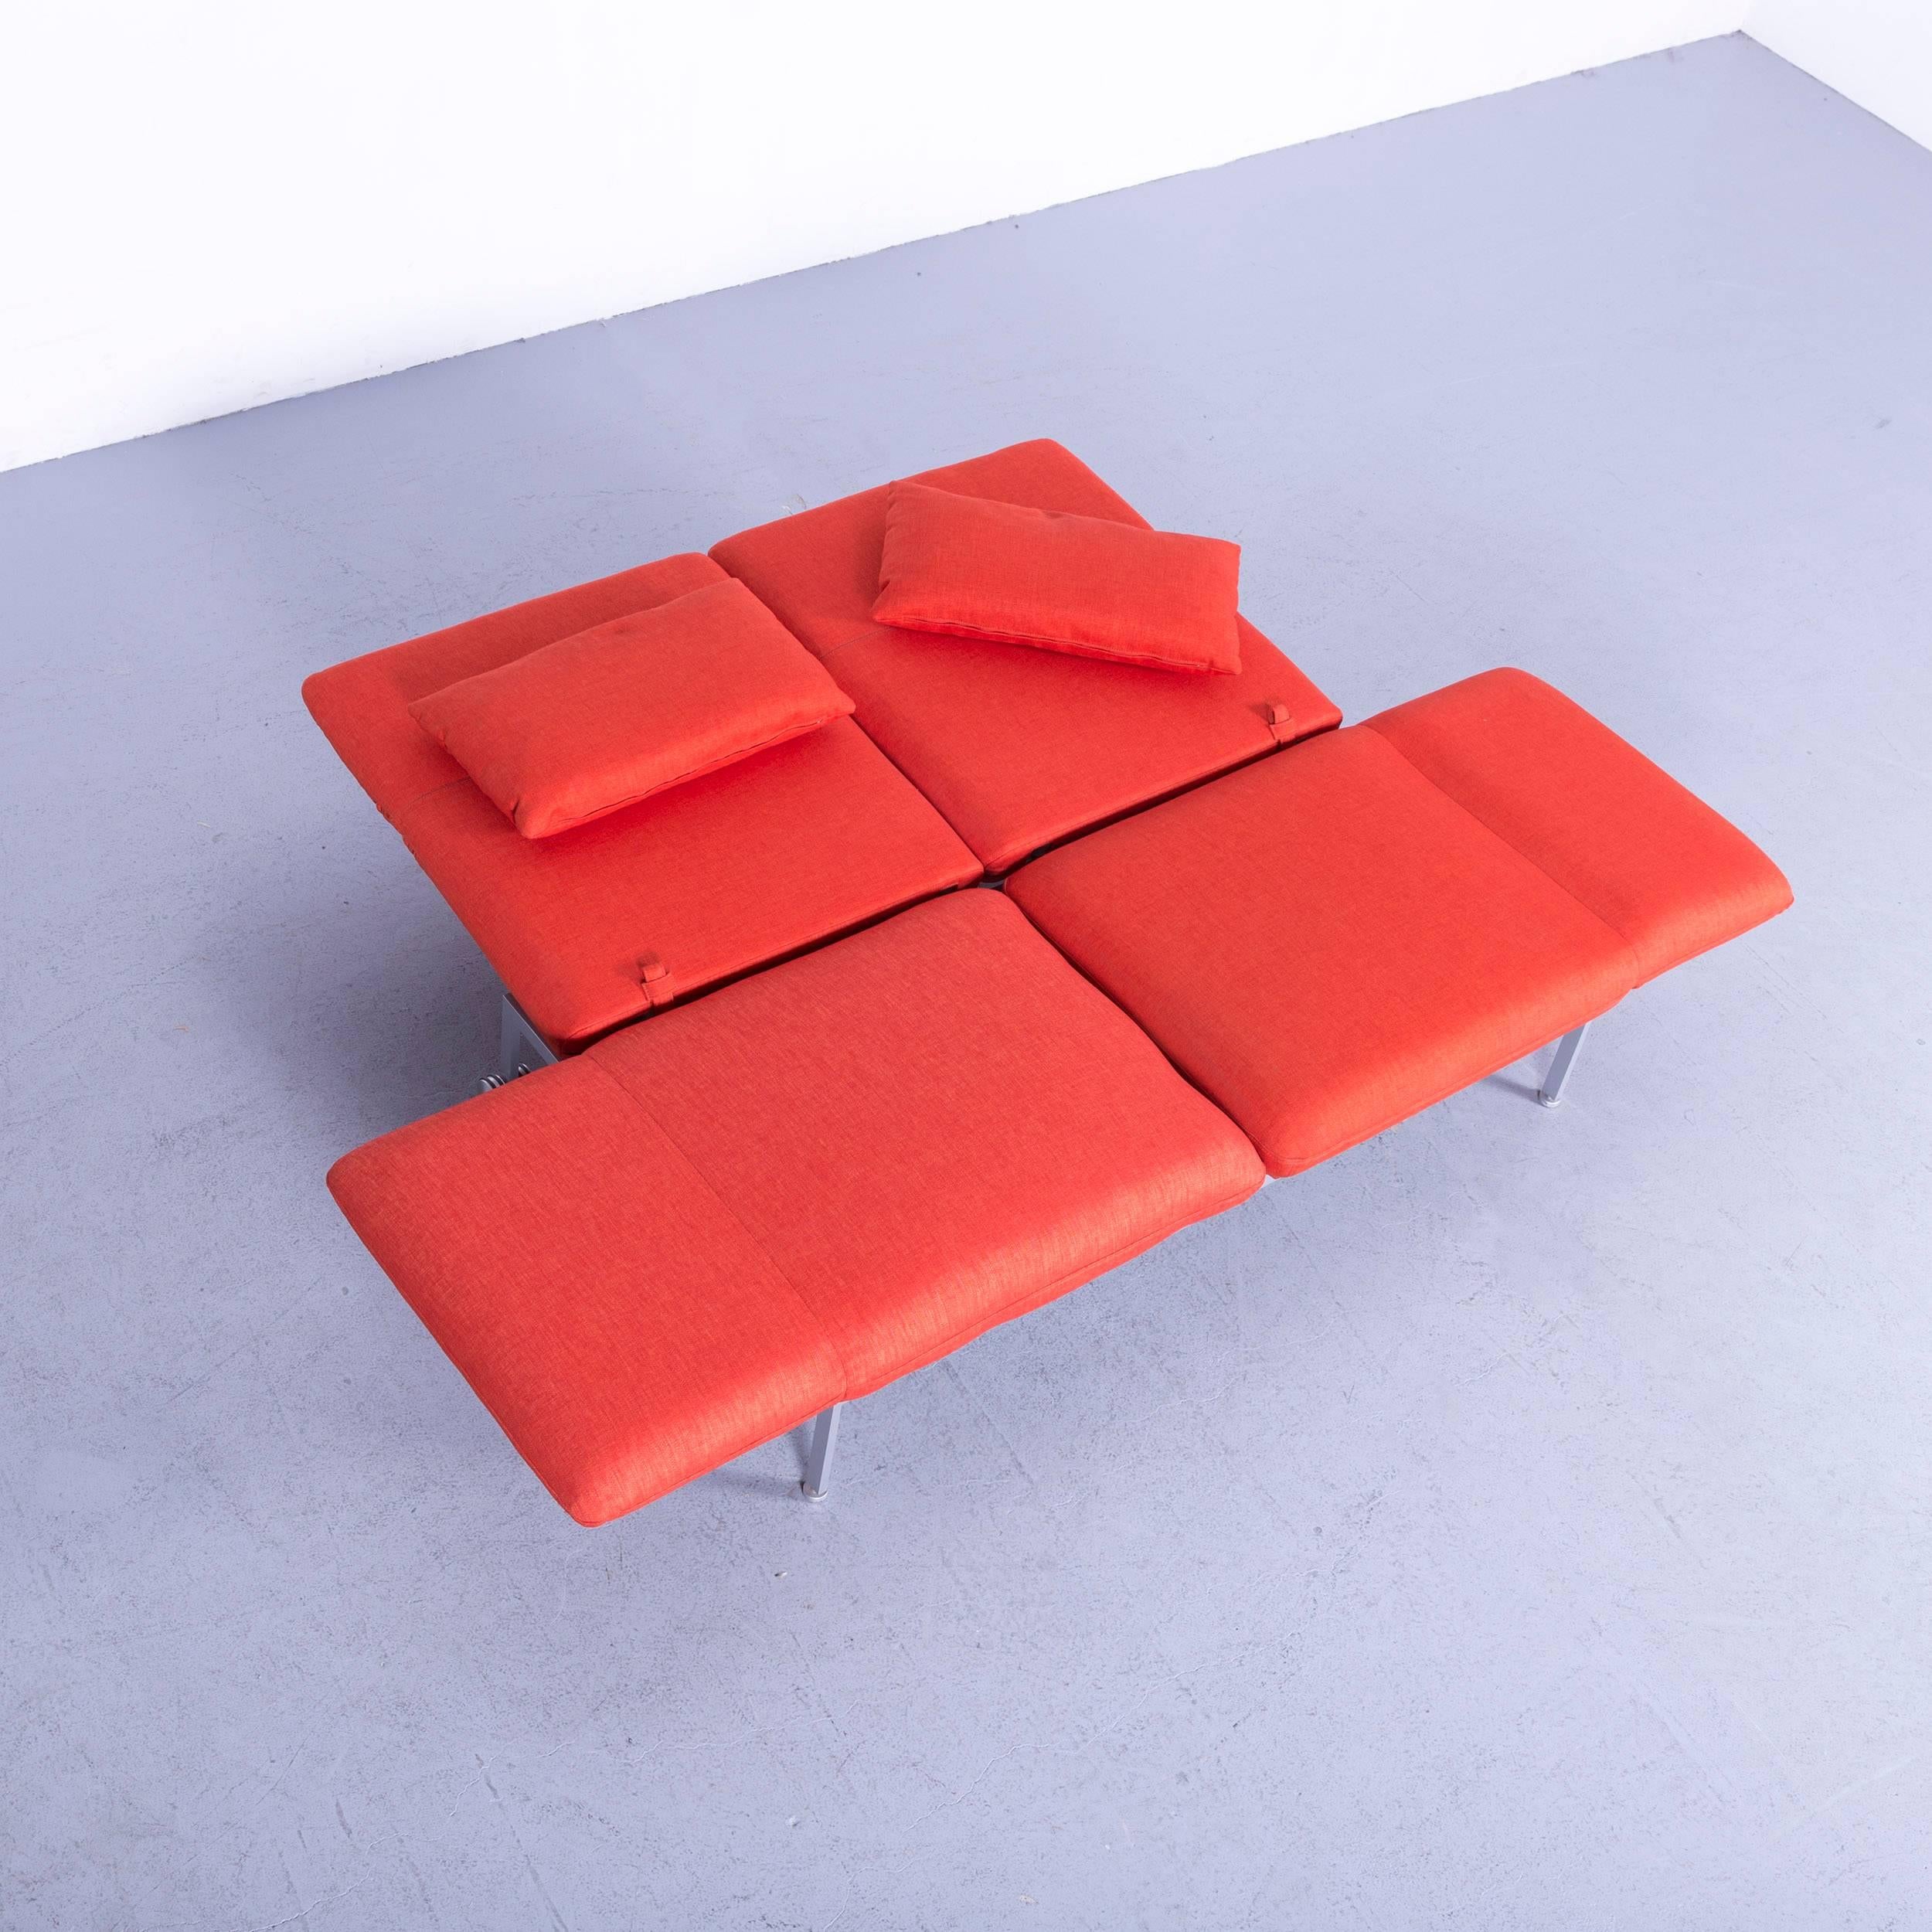 Brühl & Sippold Roro Designer Bed Sofa in Red Orange Fabric with Great Functions For Sale 3